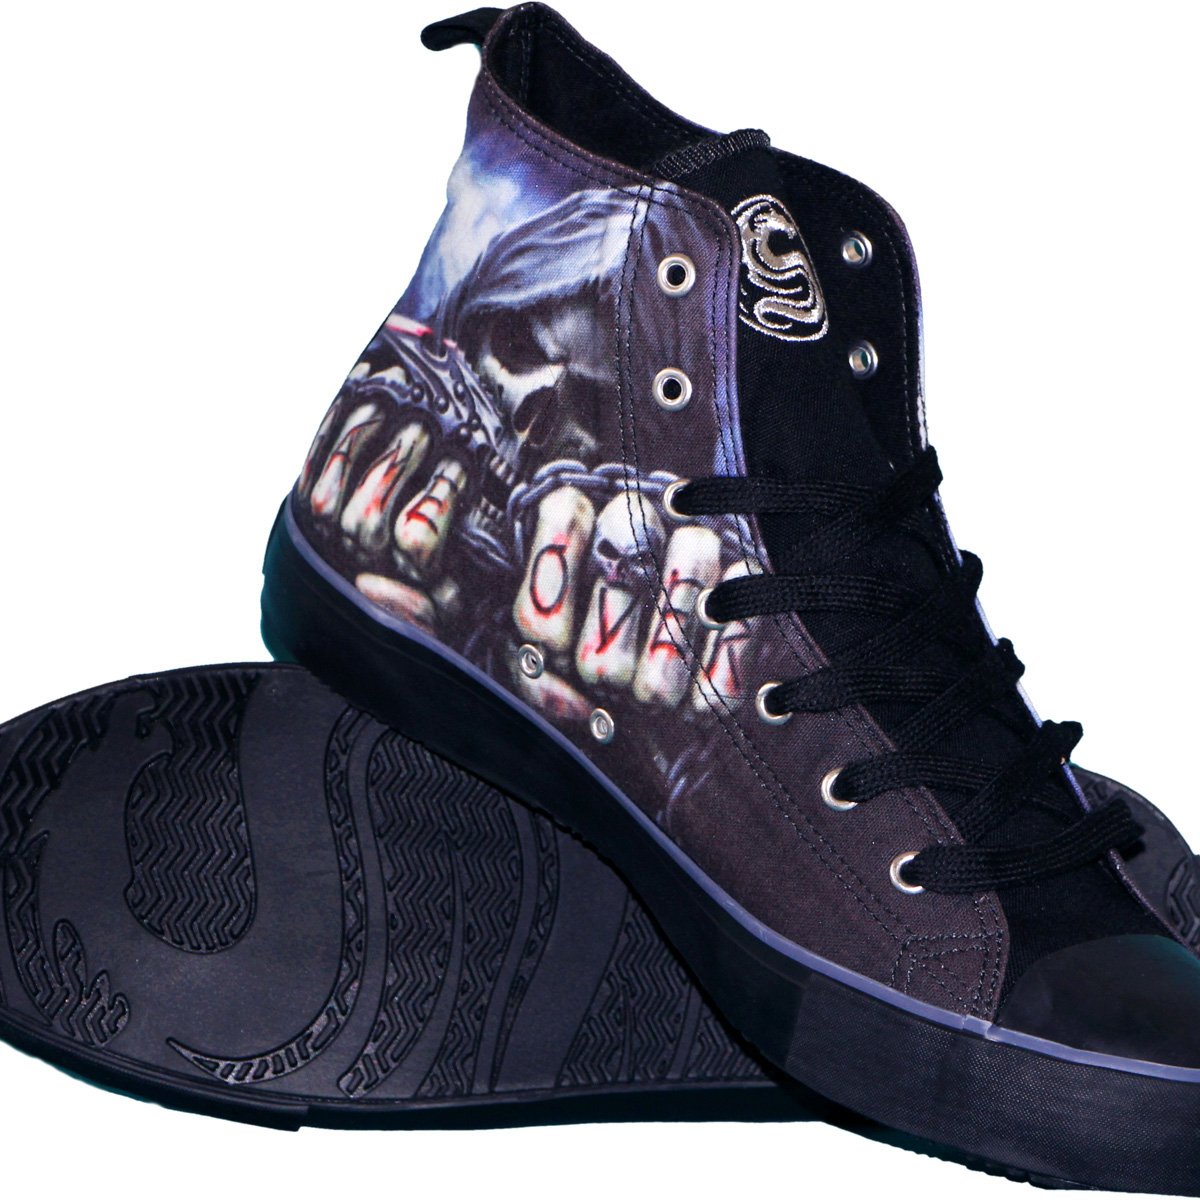 GAME OVER - Sneakers - Men's High Top Laceup - Spiral USA